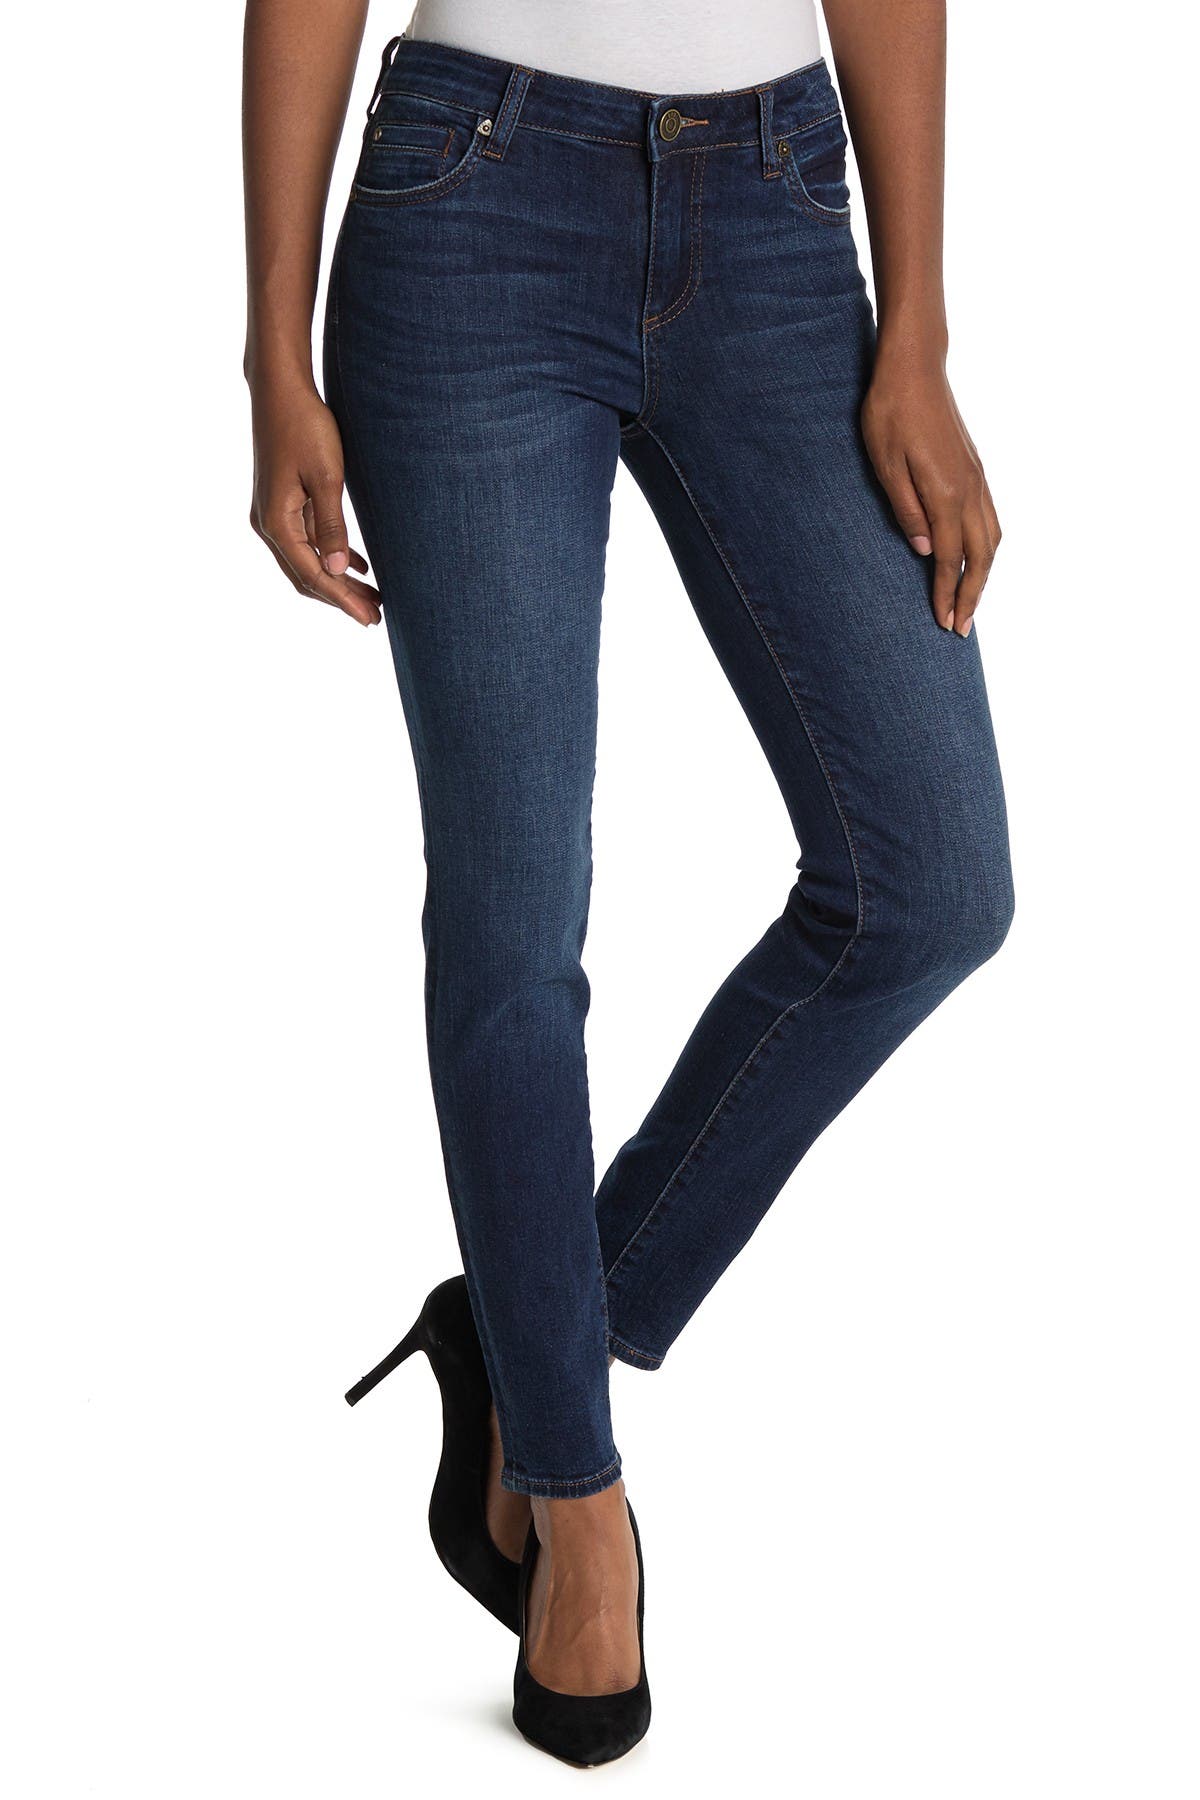 kut from the kloth jeans nordstrom